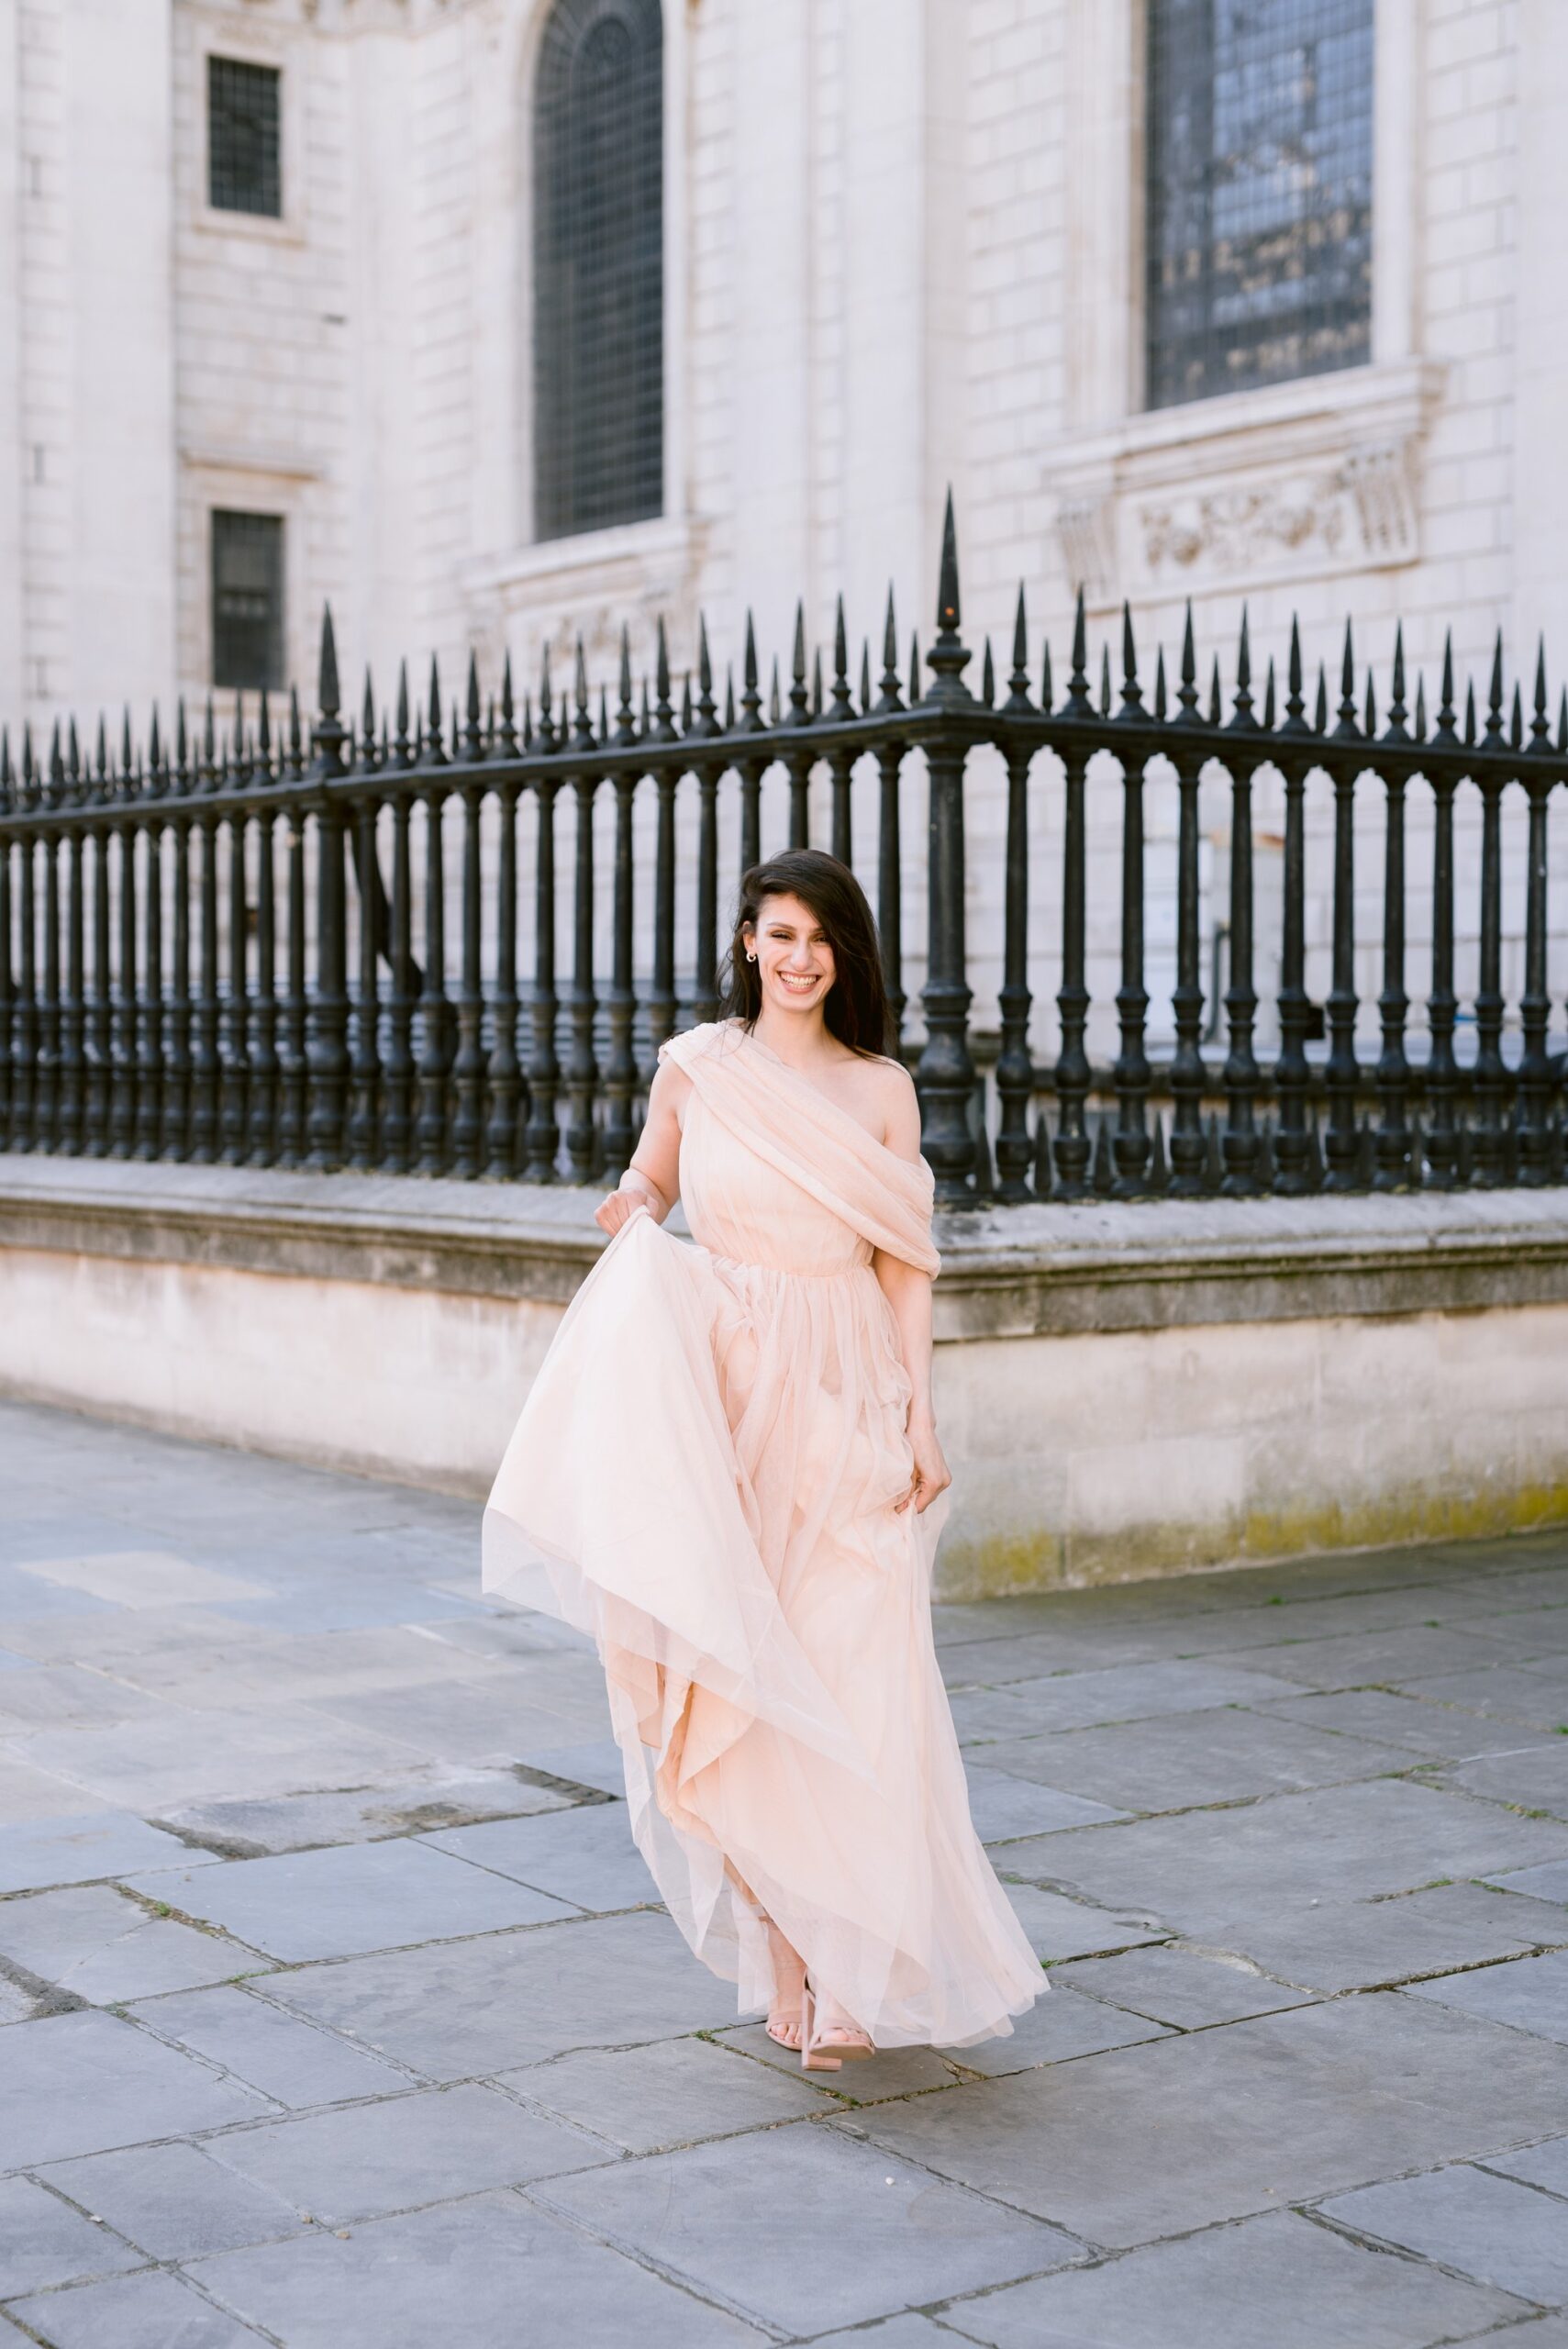 Katia and John photographed by St Paul's Cathedral in London. She wears a pale coral longline off the shoulder dress. He's in black tie and suit. Captured by Eva Tarnok Photography